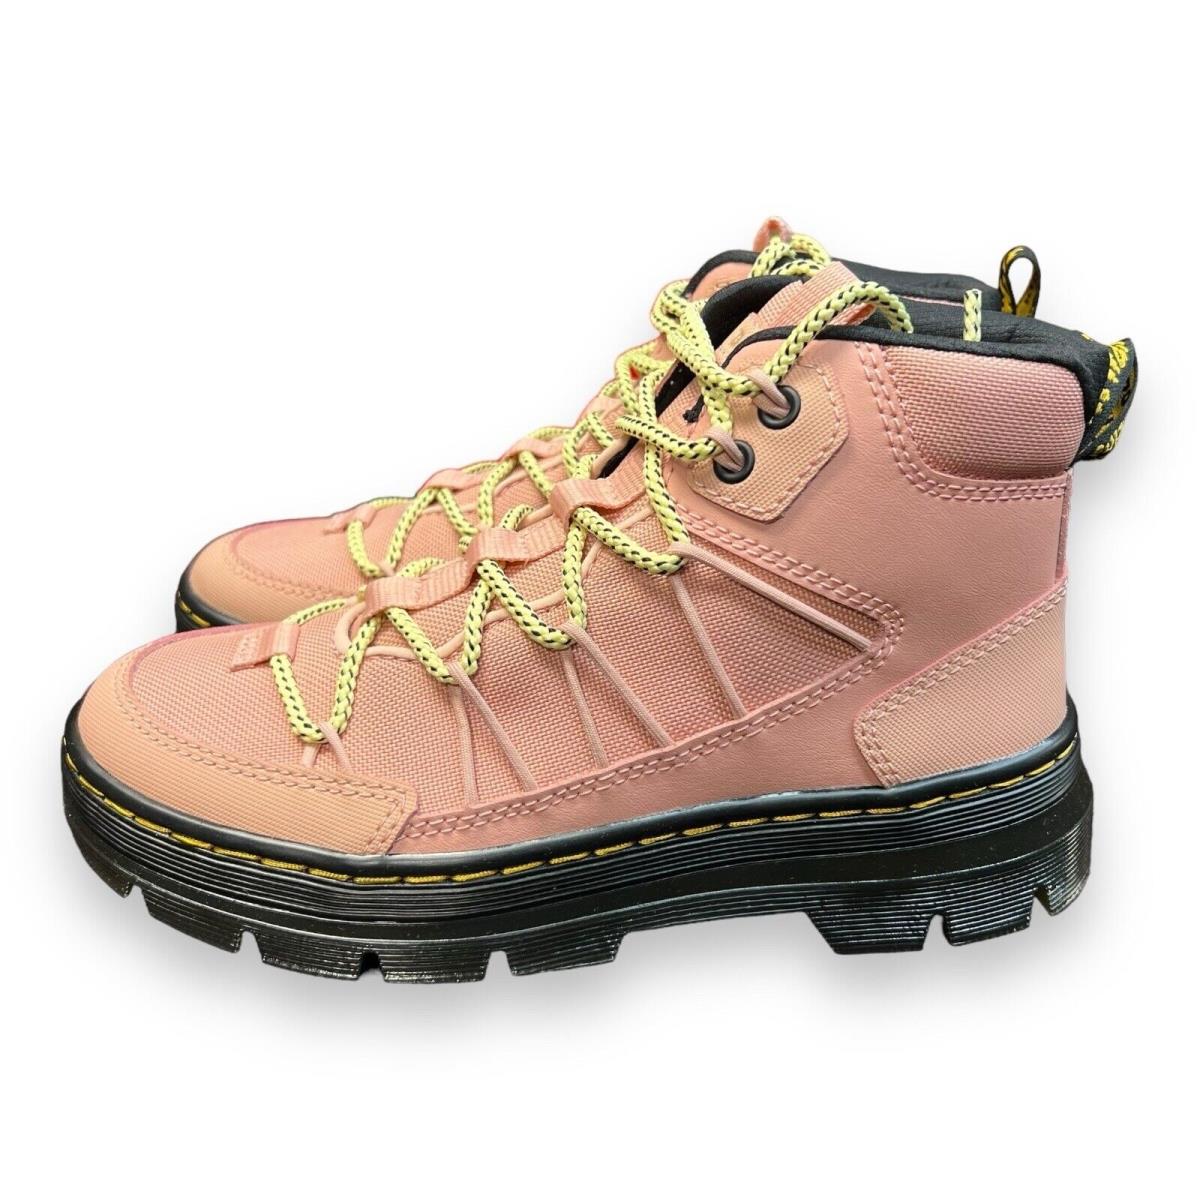 Dr Martens Womens Size 7 Buwick W Peach Beige Leather Lace Up Boots